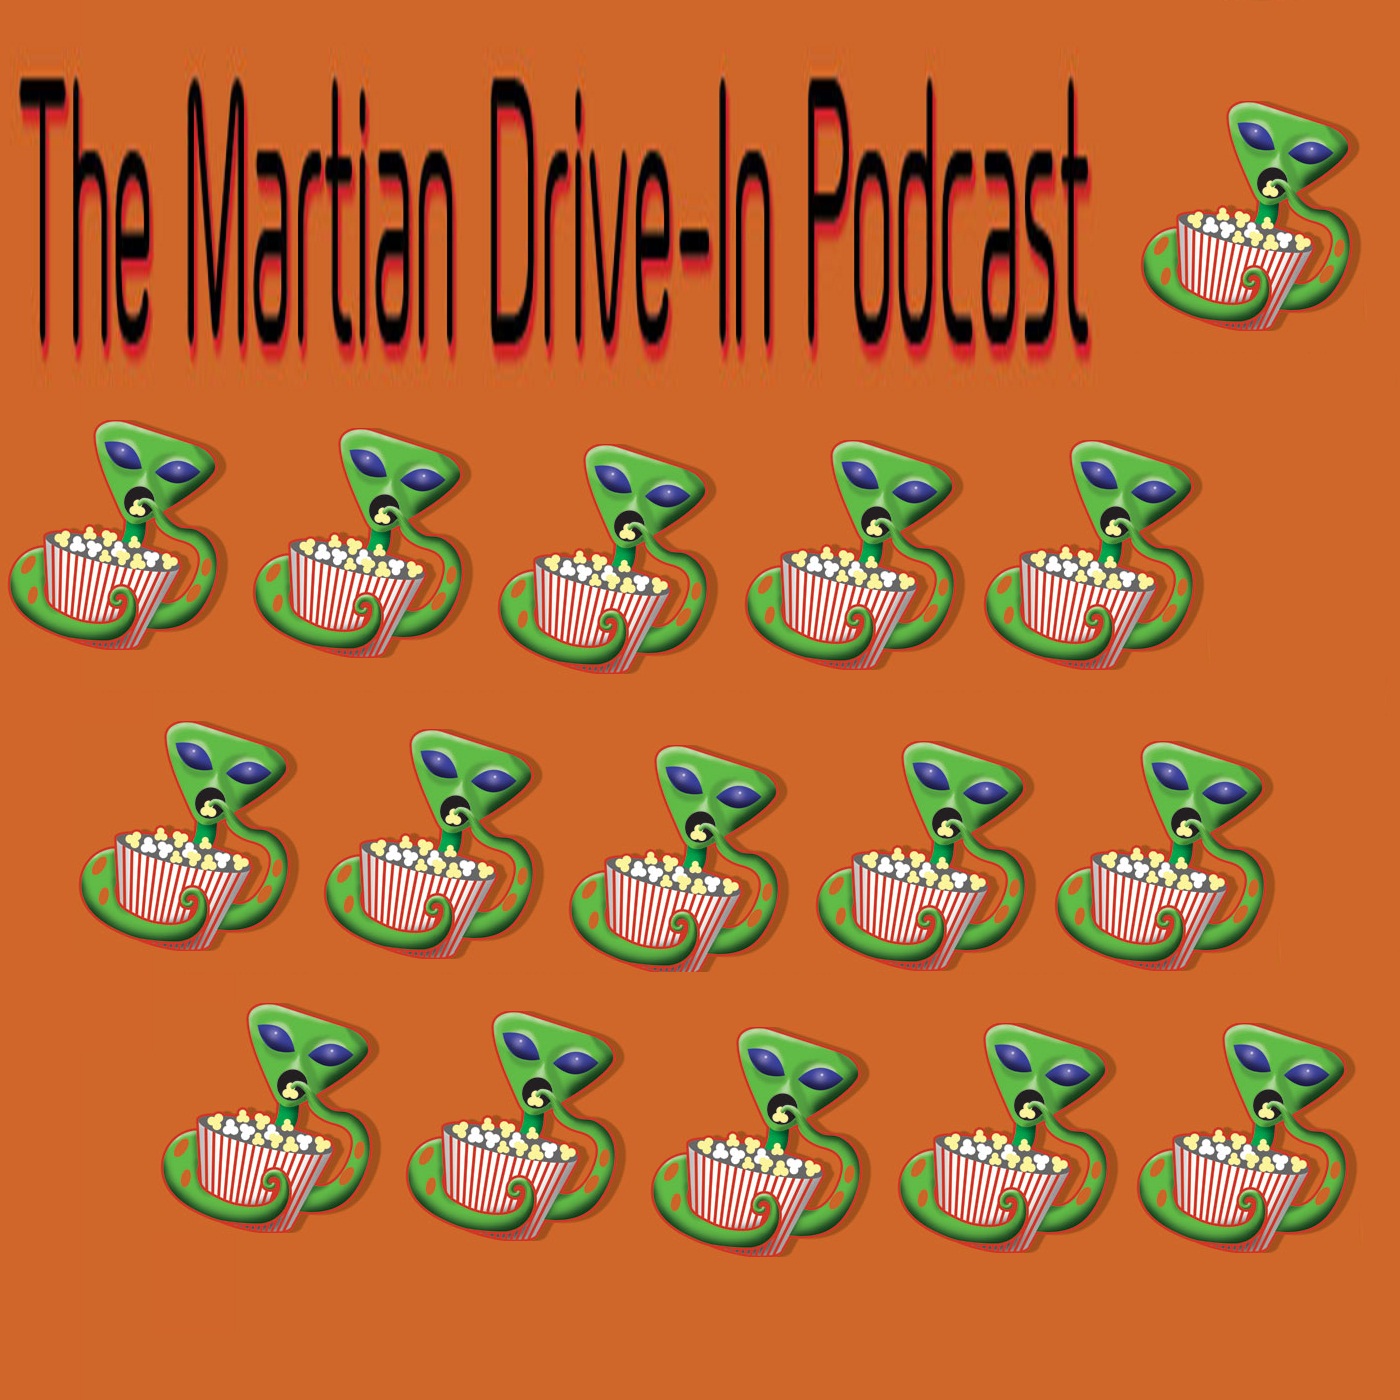 Martian Drive-In Podcast 102 - The Expanse